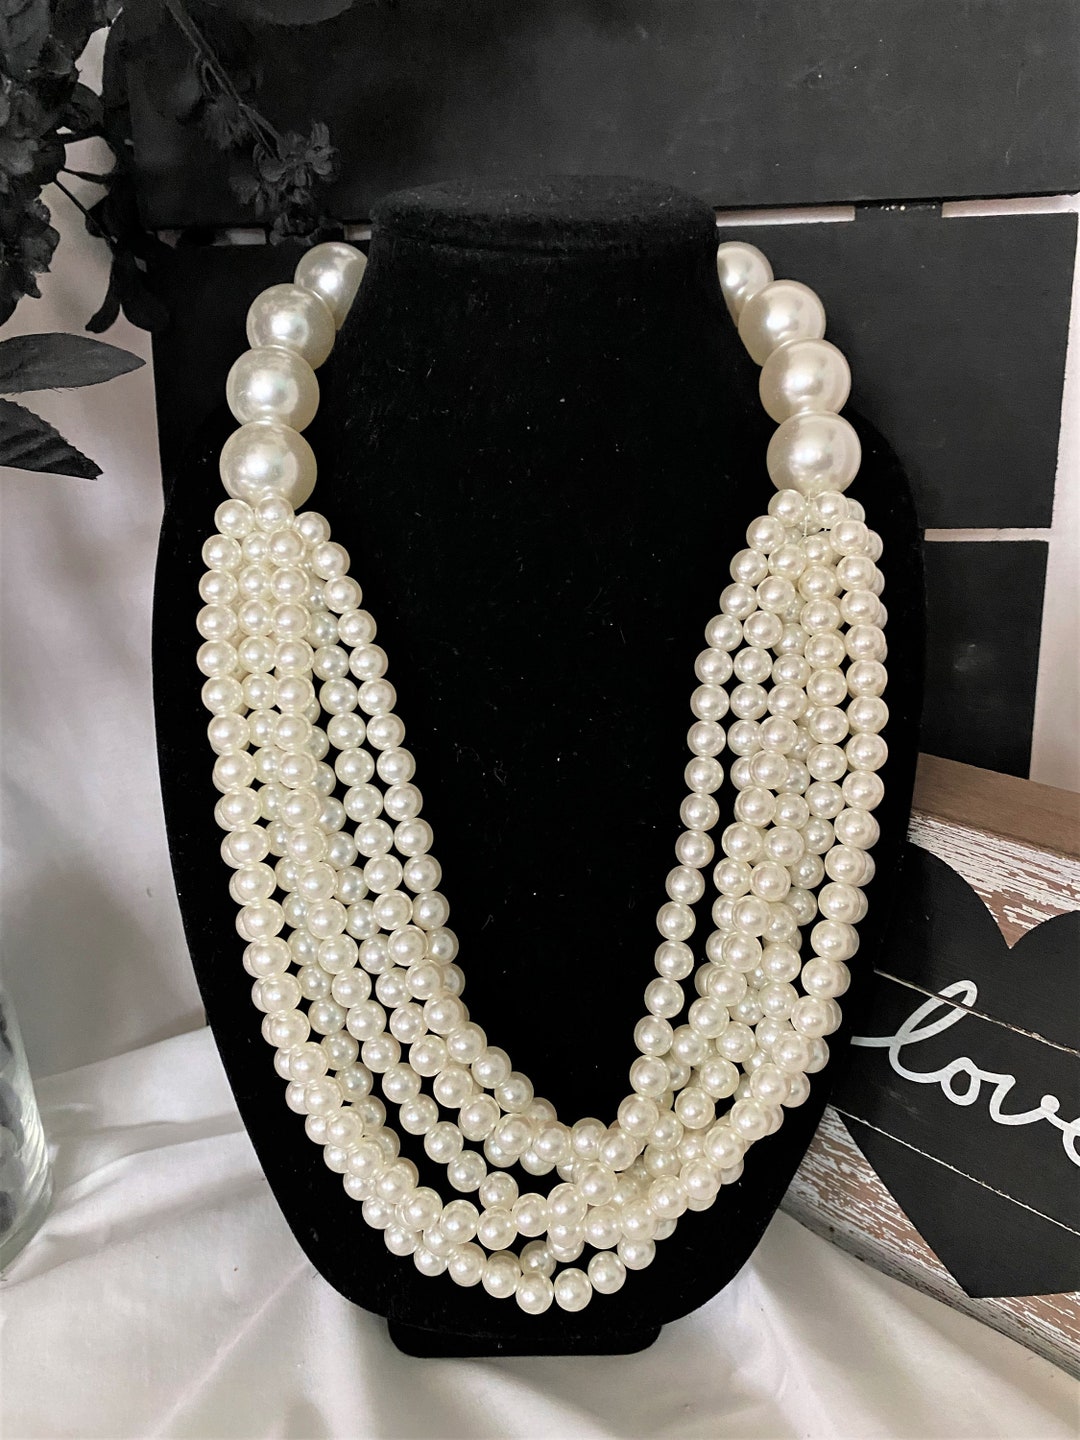 Fashion 21 Women's Ten Multi-Strand Simulated Pearl Statement Necklace and  Earrings Set in Cream Color